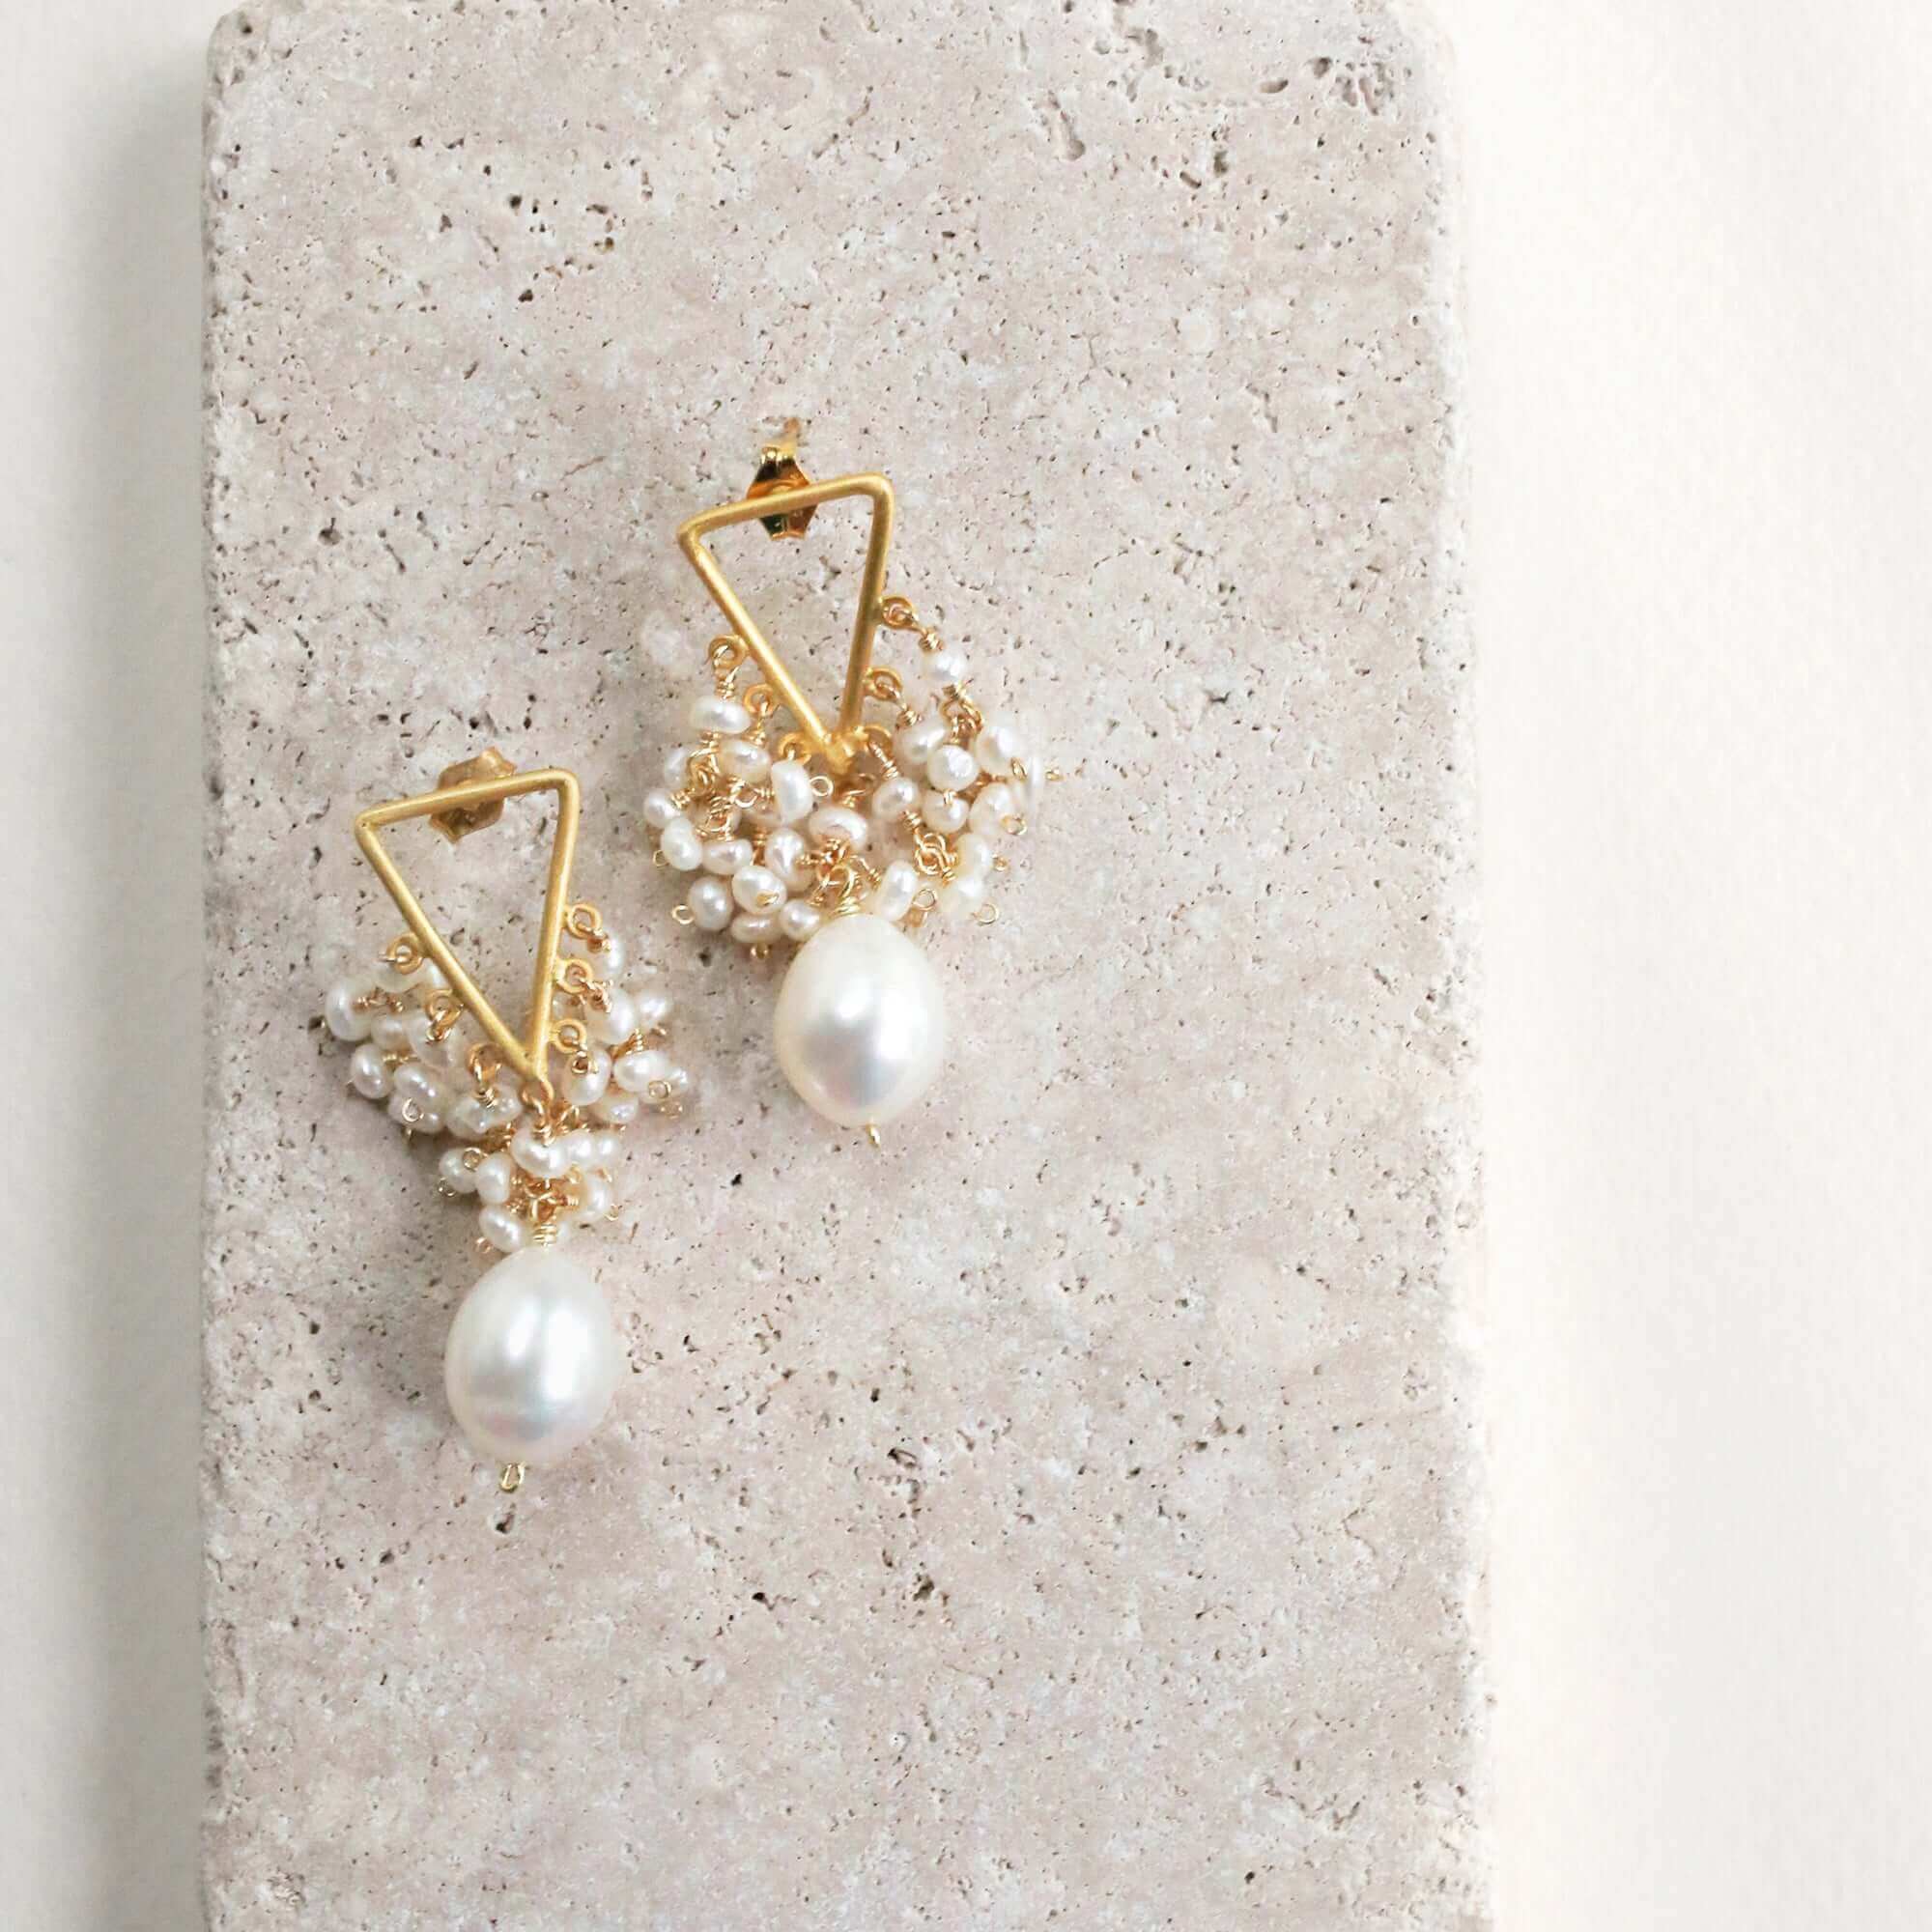 Gold Earrings featuring beautiful white freshwater pearls